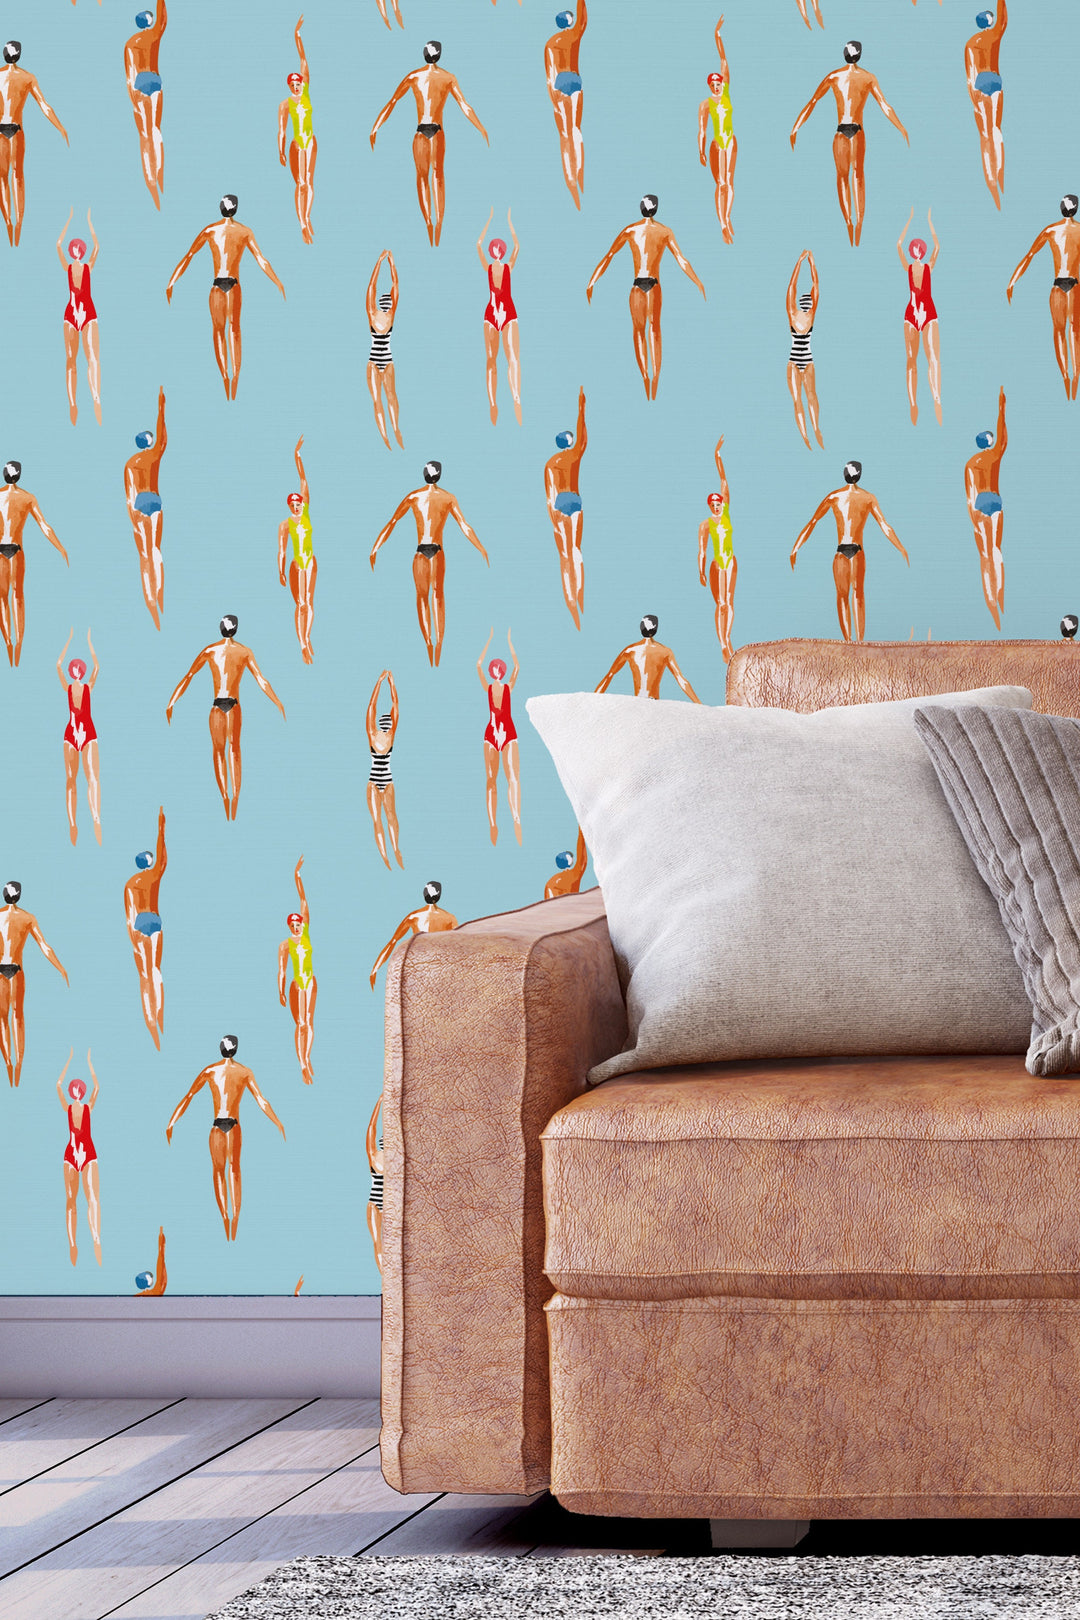 Swimmers Retro Wallpaper - Peel & Stick Wallpaper - Removable Self Adhesive and Traditional wallpaper #53378 /1040